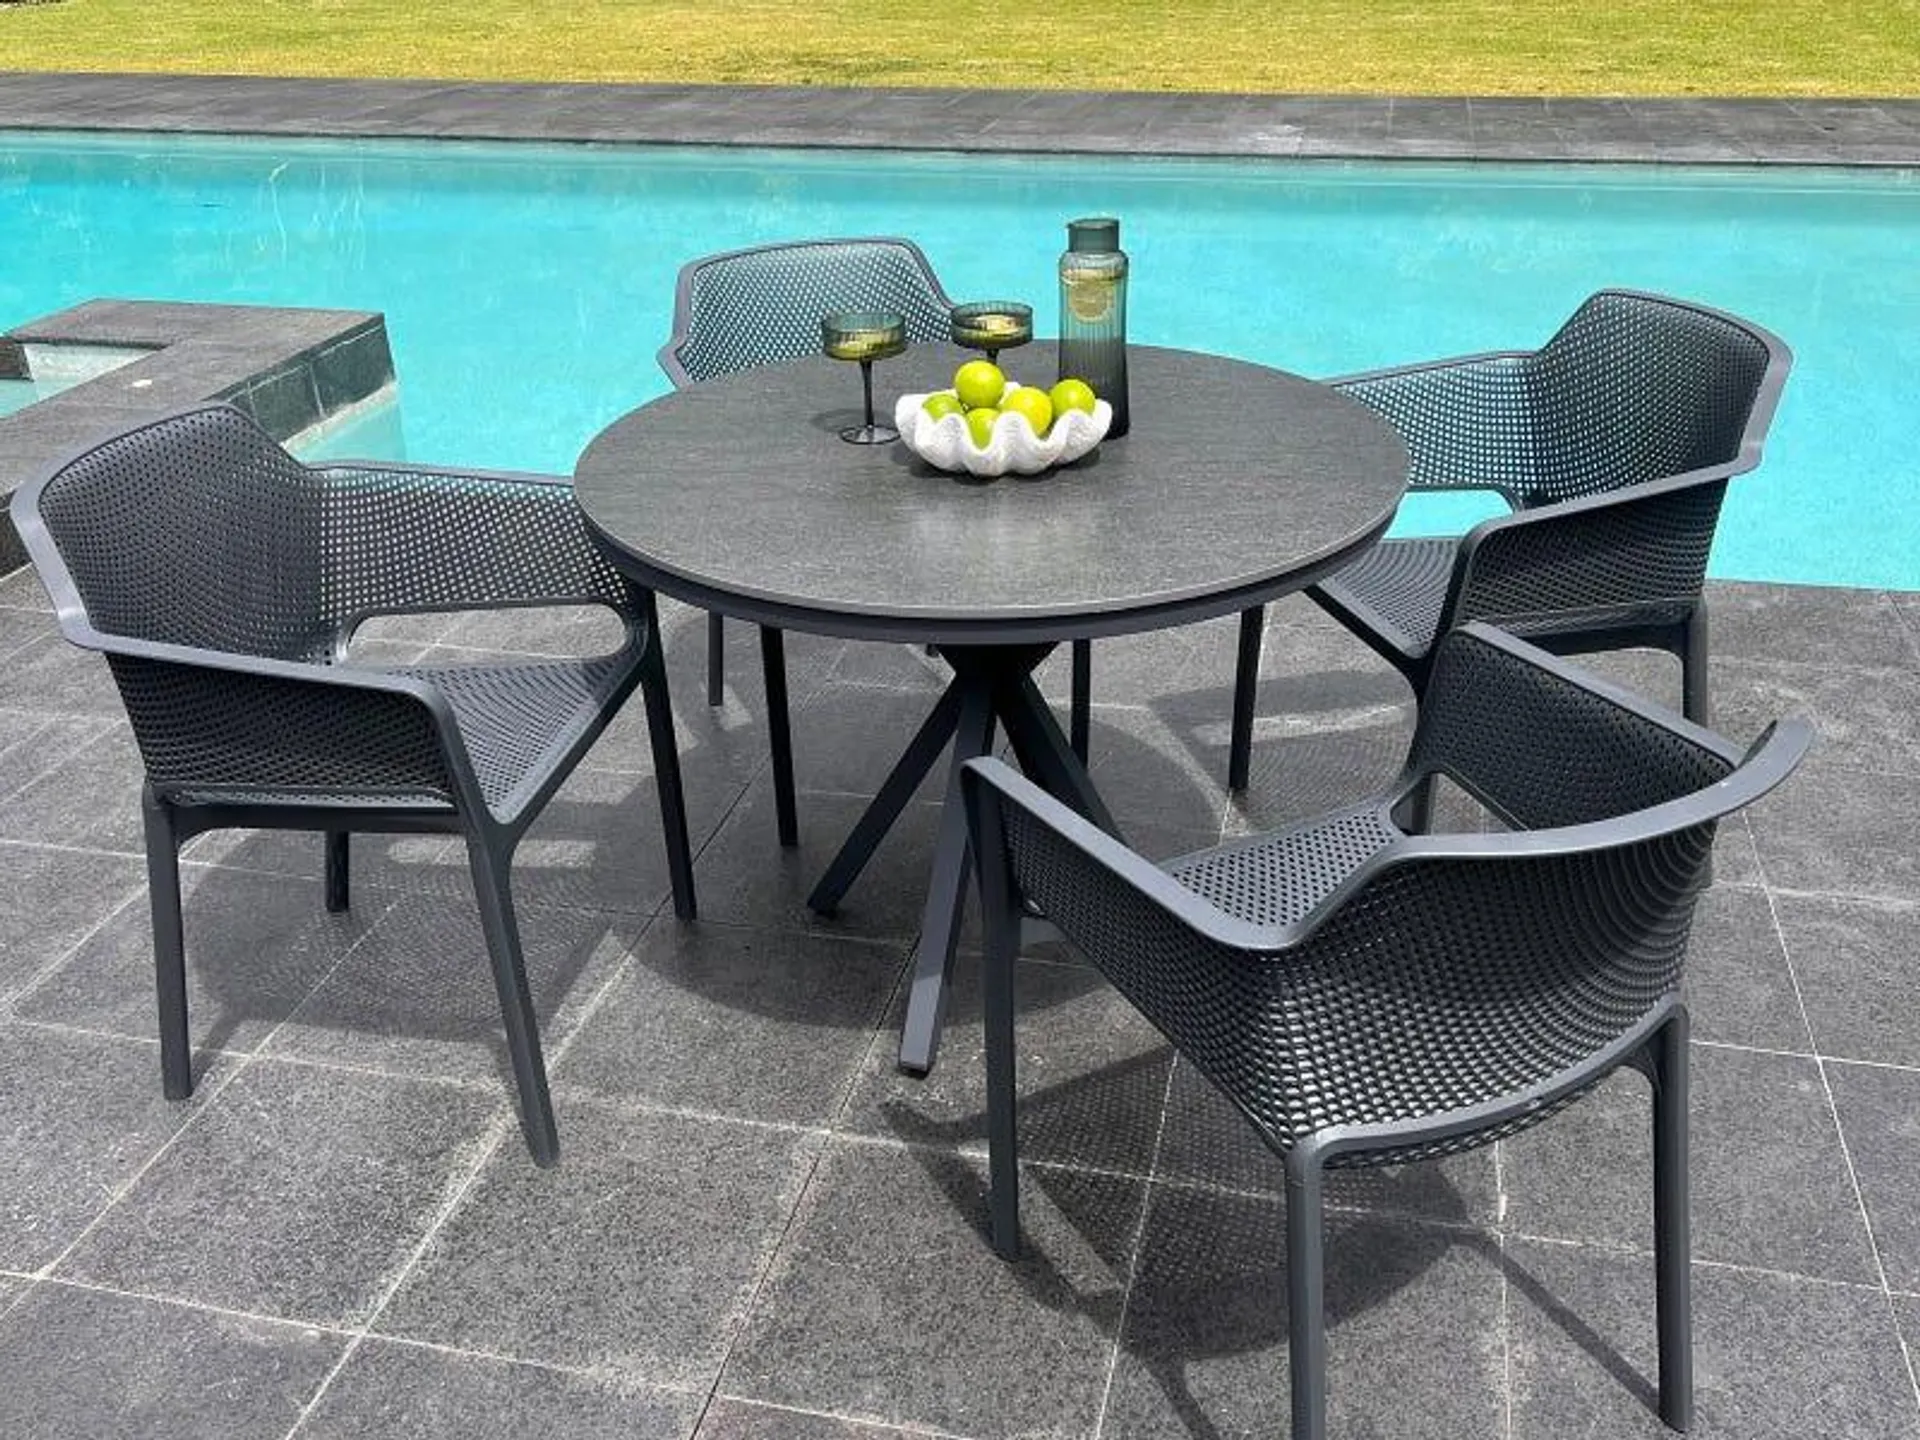 Adele Round Ceramic Table with Bailey Chairs 5pc Outdoor Dining Setting